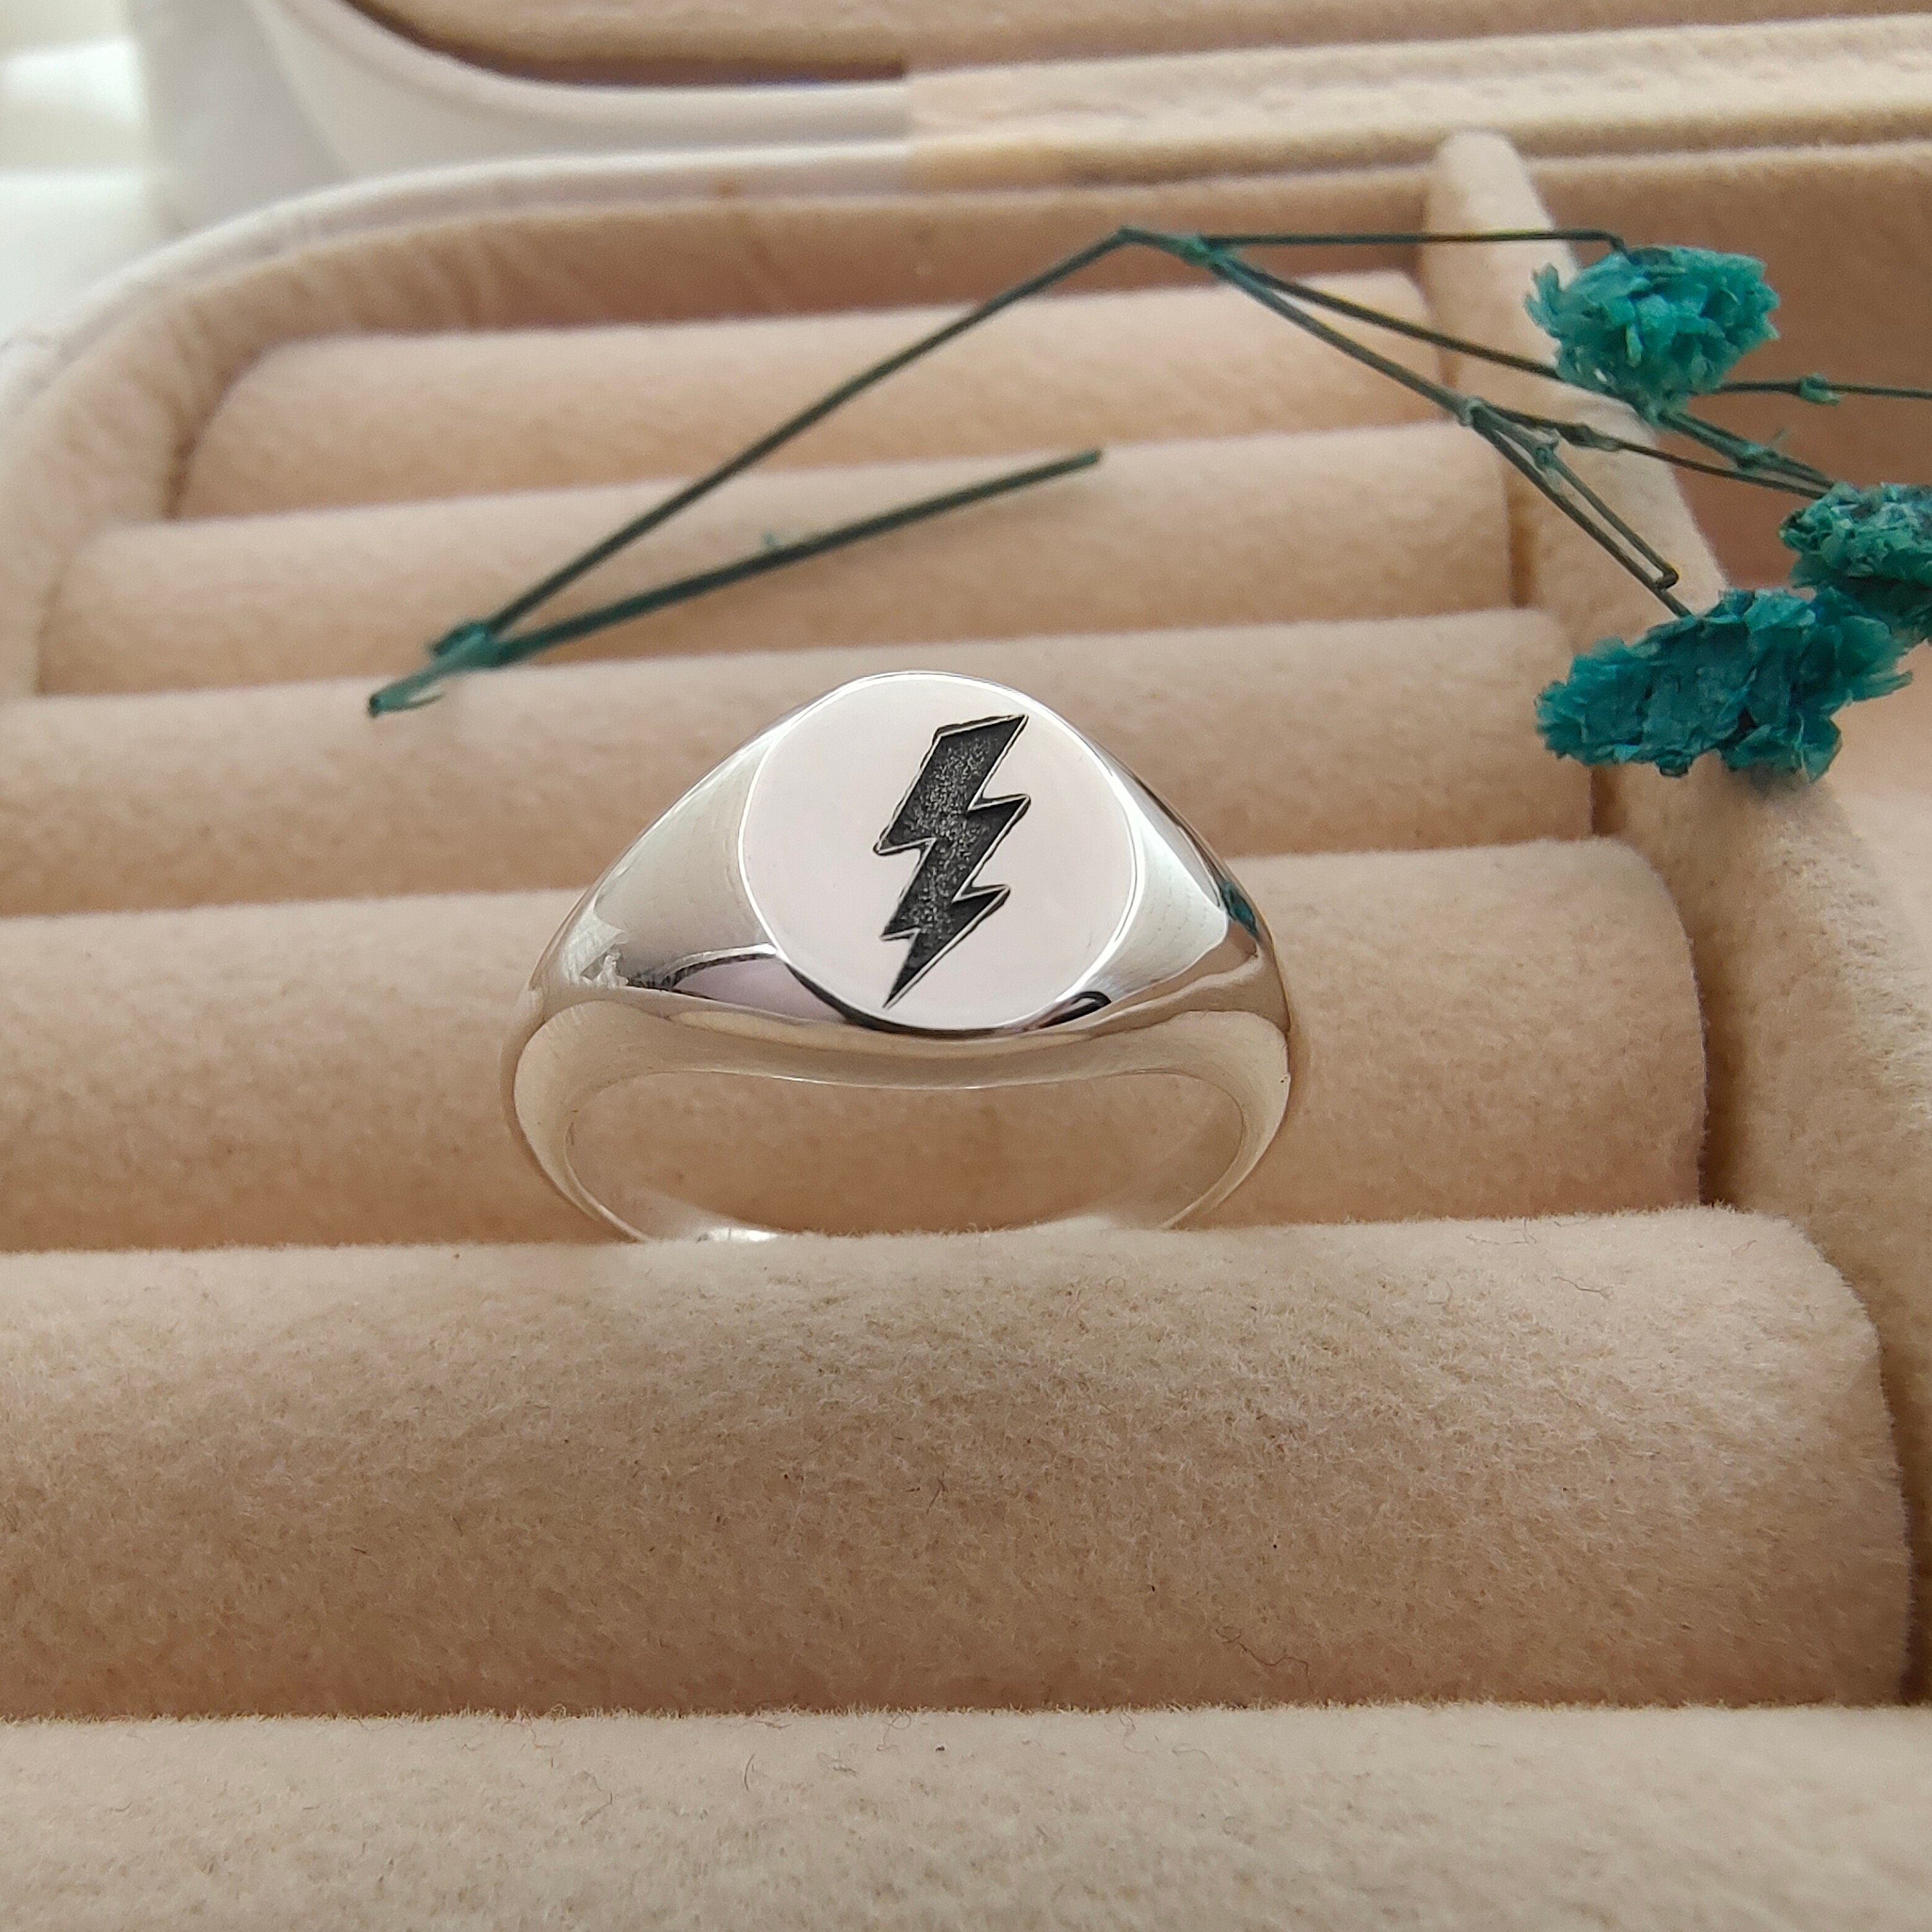 Buy Mens Ring Adjustable Silver Rings for Men Lightning Bolt Ring Thin Band Rings  Silver Ring Men Mens Jewelry Gifts Online in India - Etsy